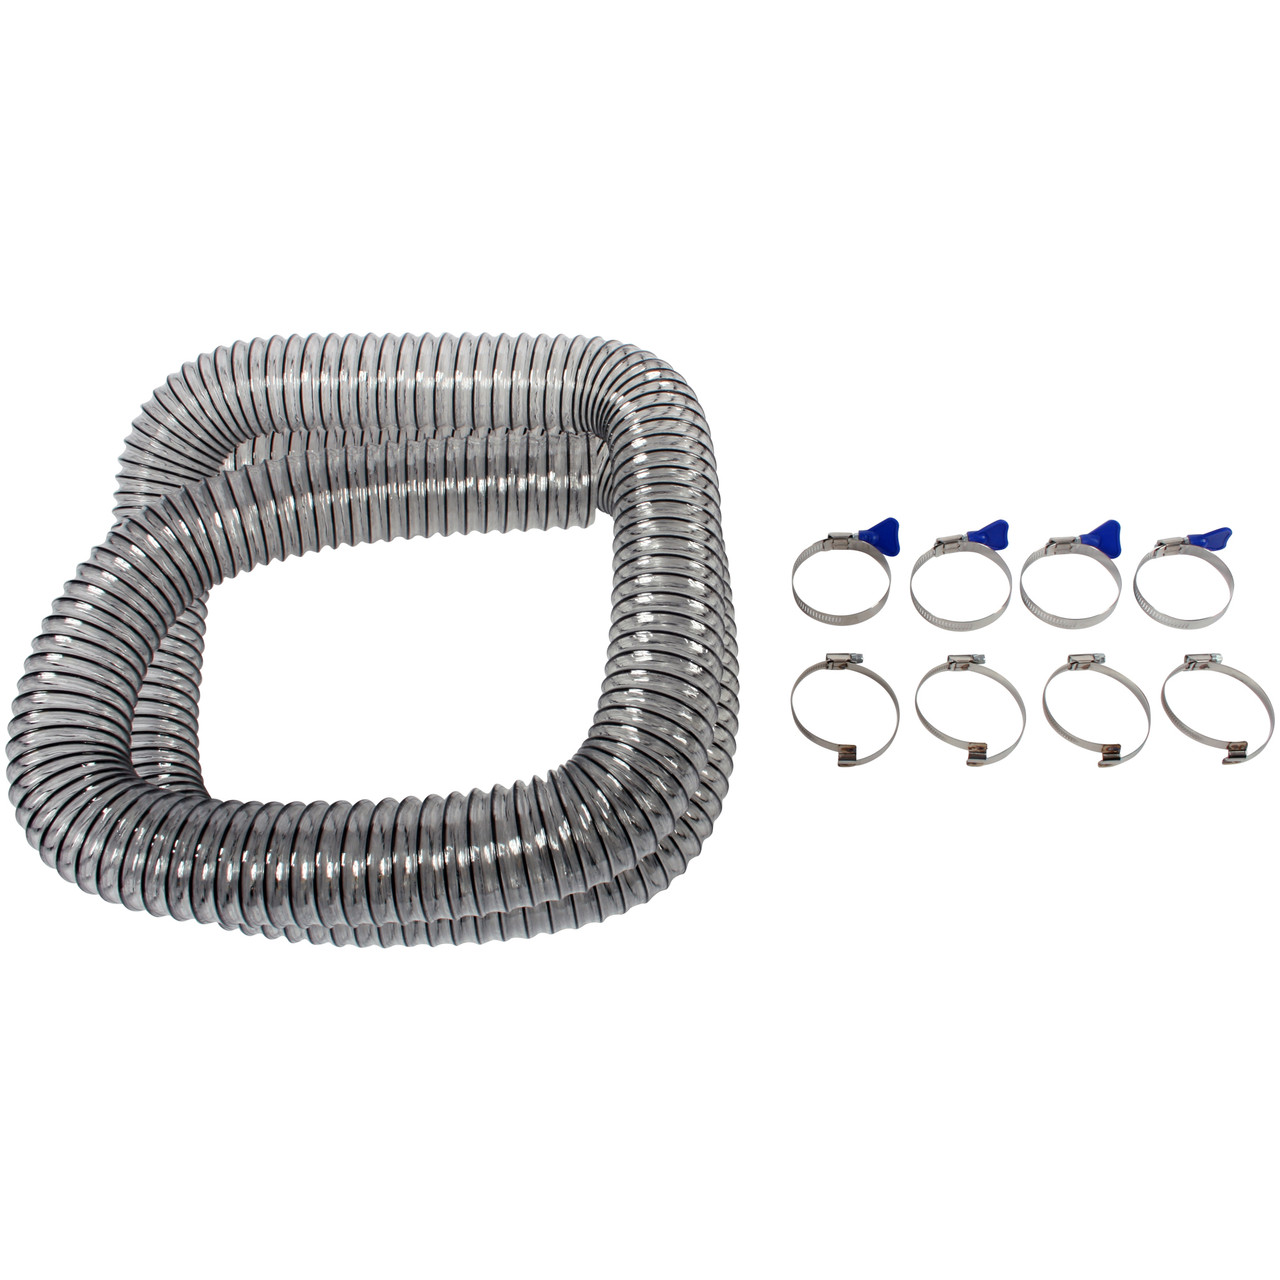 63mm Wire Support Hose with Bridge and Key Clamps